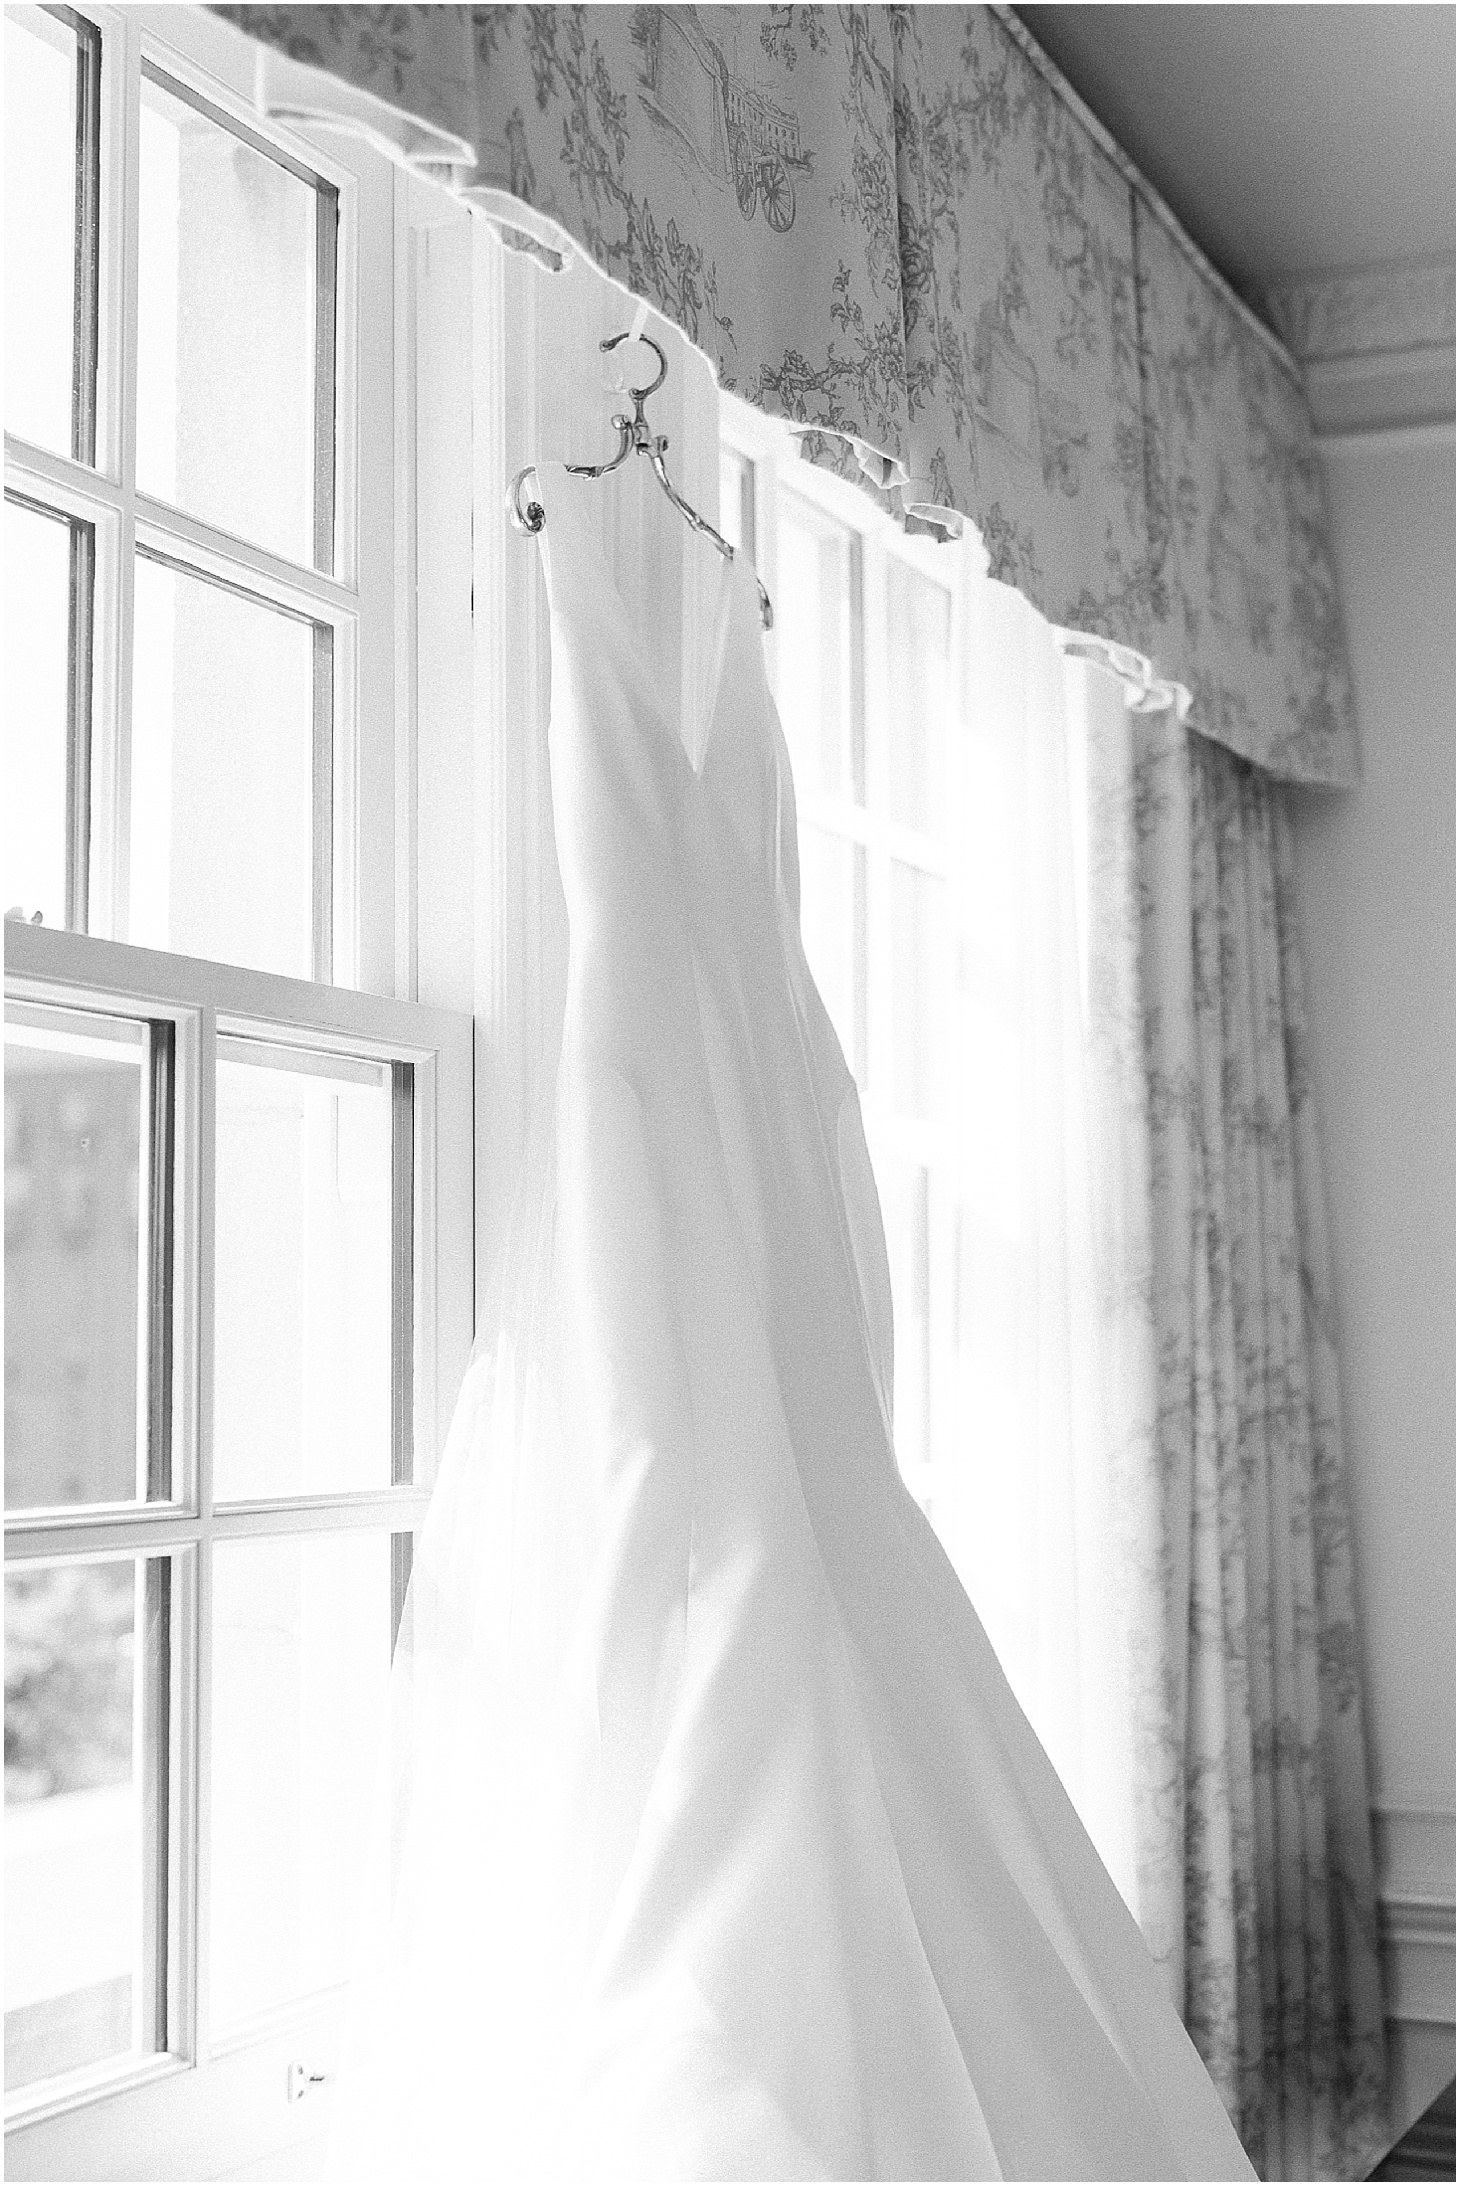 Sareh Nouri Wedding Gown, Champagne-toned Multicultural Wedding the Hay-Adams Hotel, Ceremony at National City Christian Church, Sarah Bradshaw Photography, DC Wedding Photographer